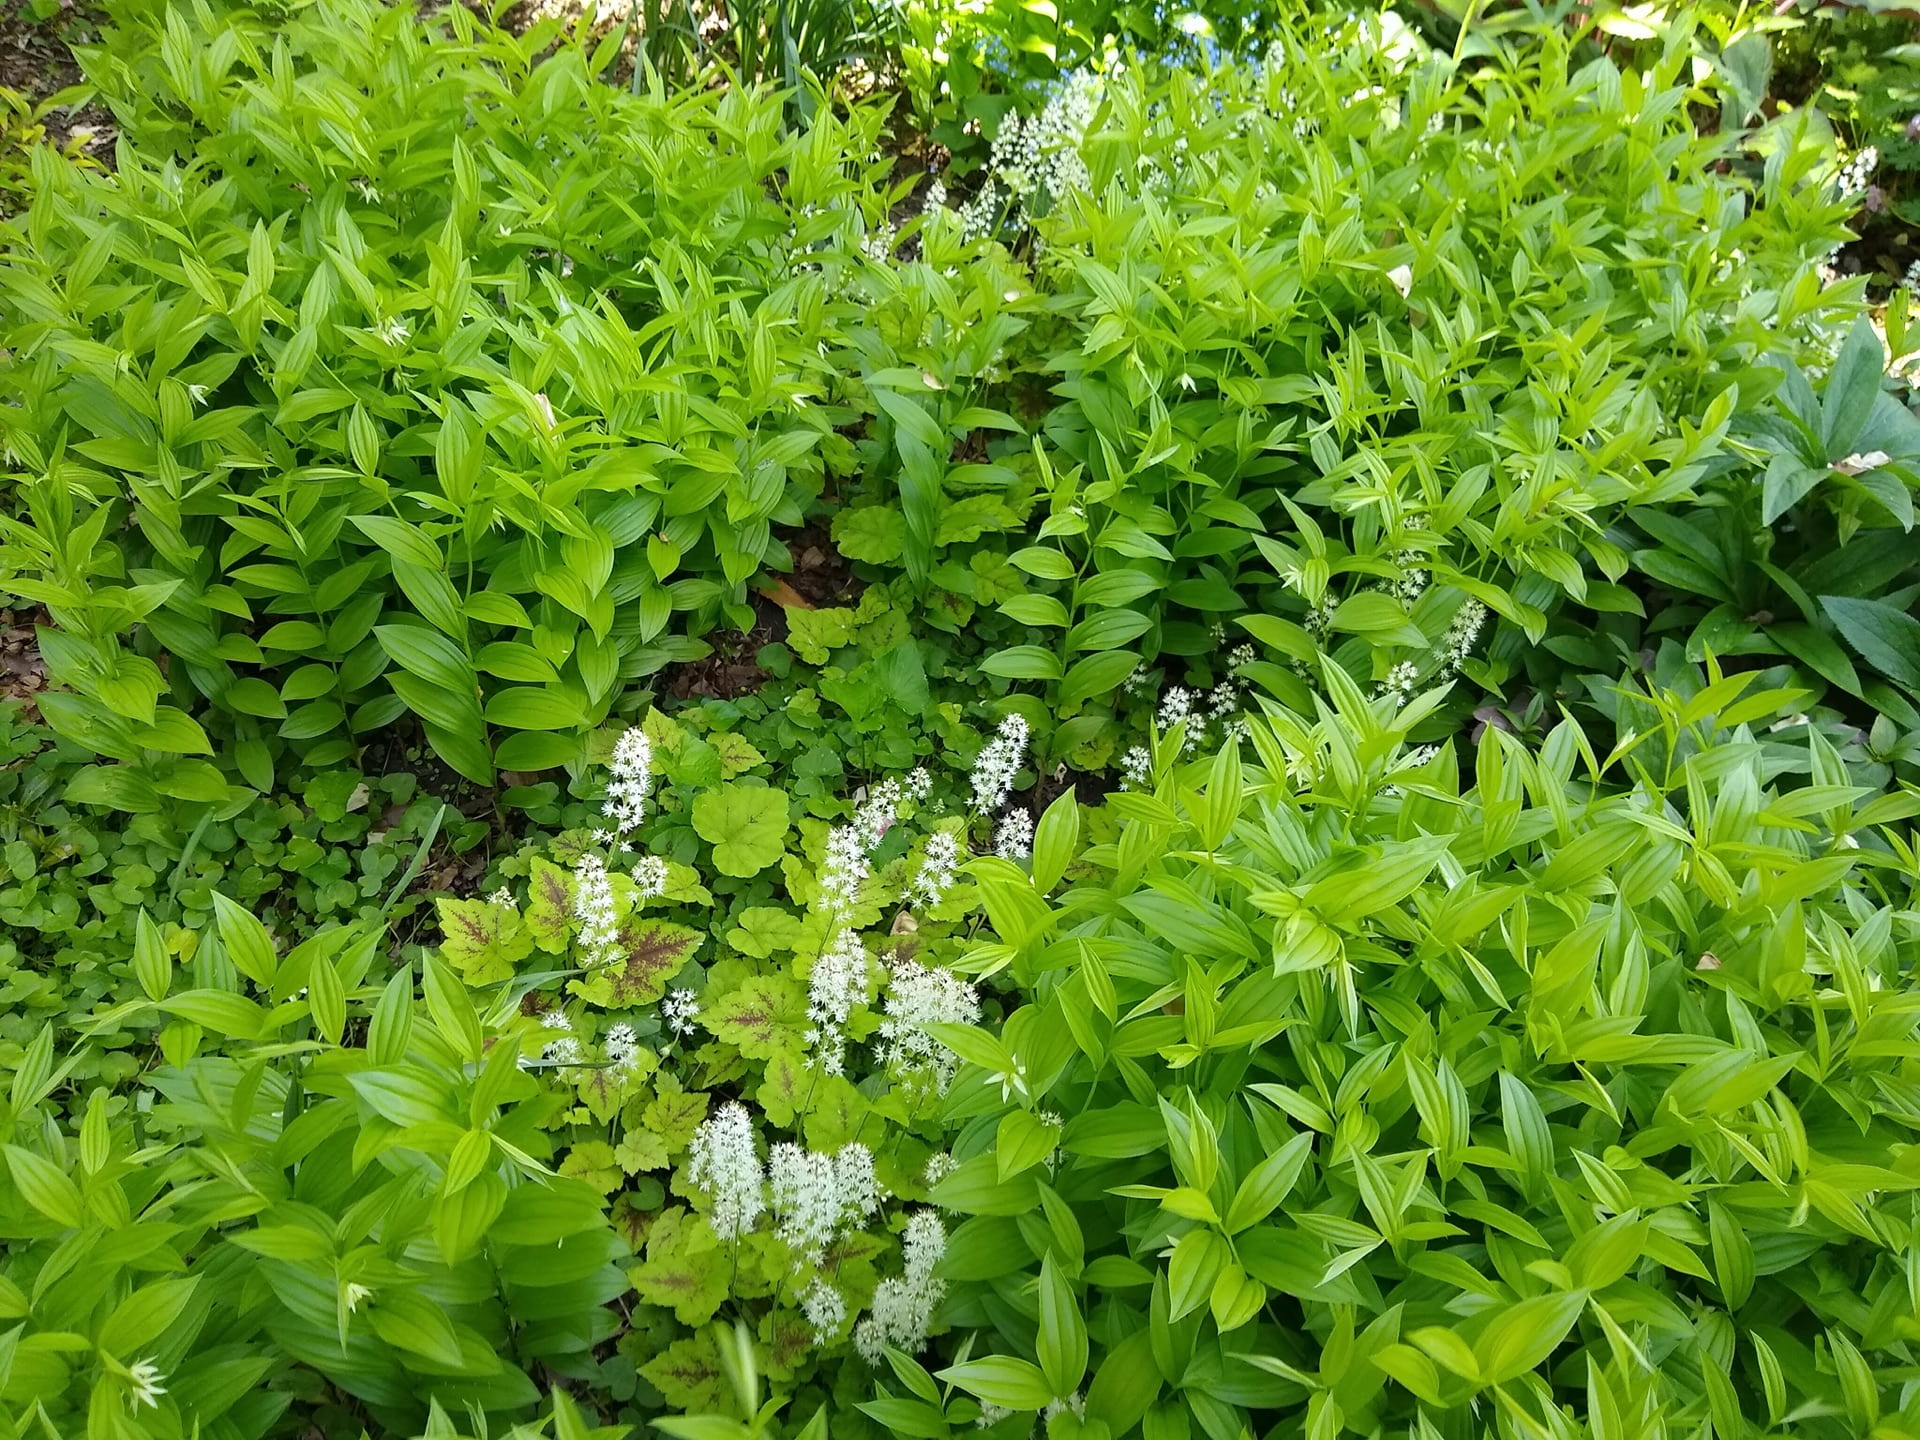 A tapestry of Tiarella cordifolia and Maianthemum stellatum thrive in the shade.